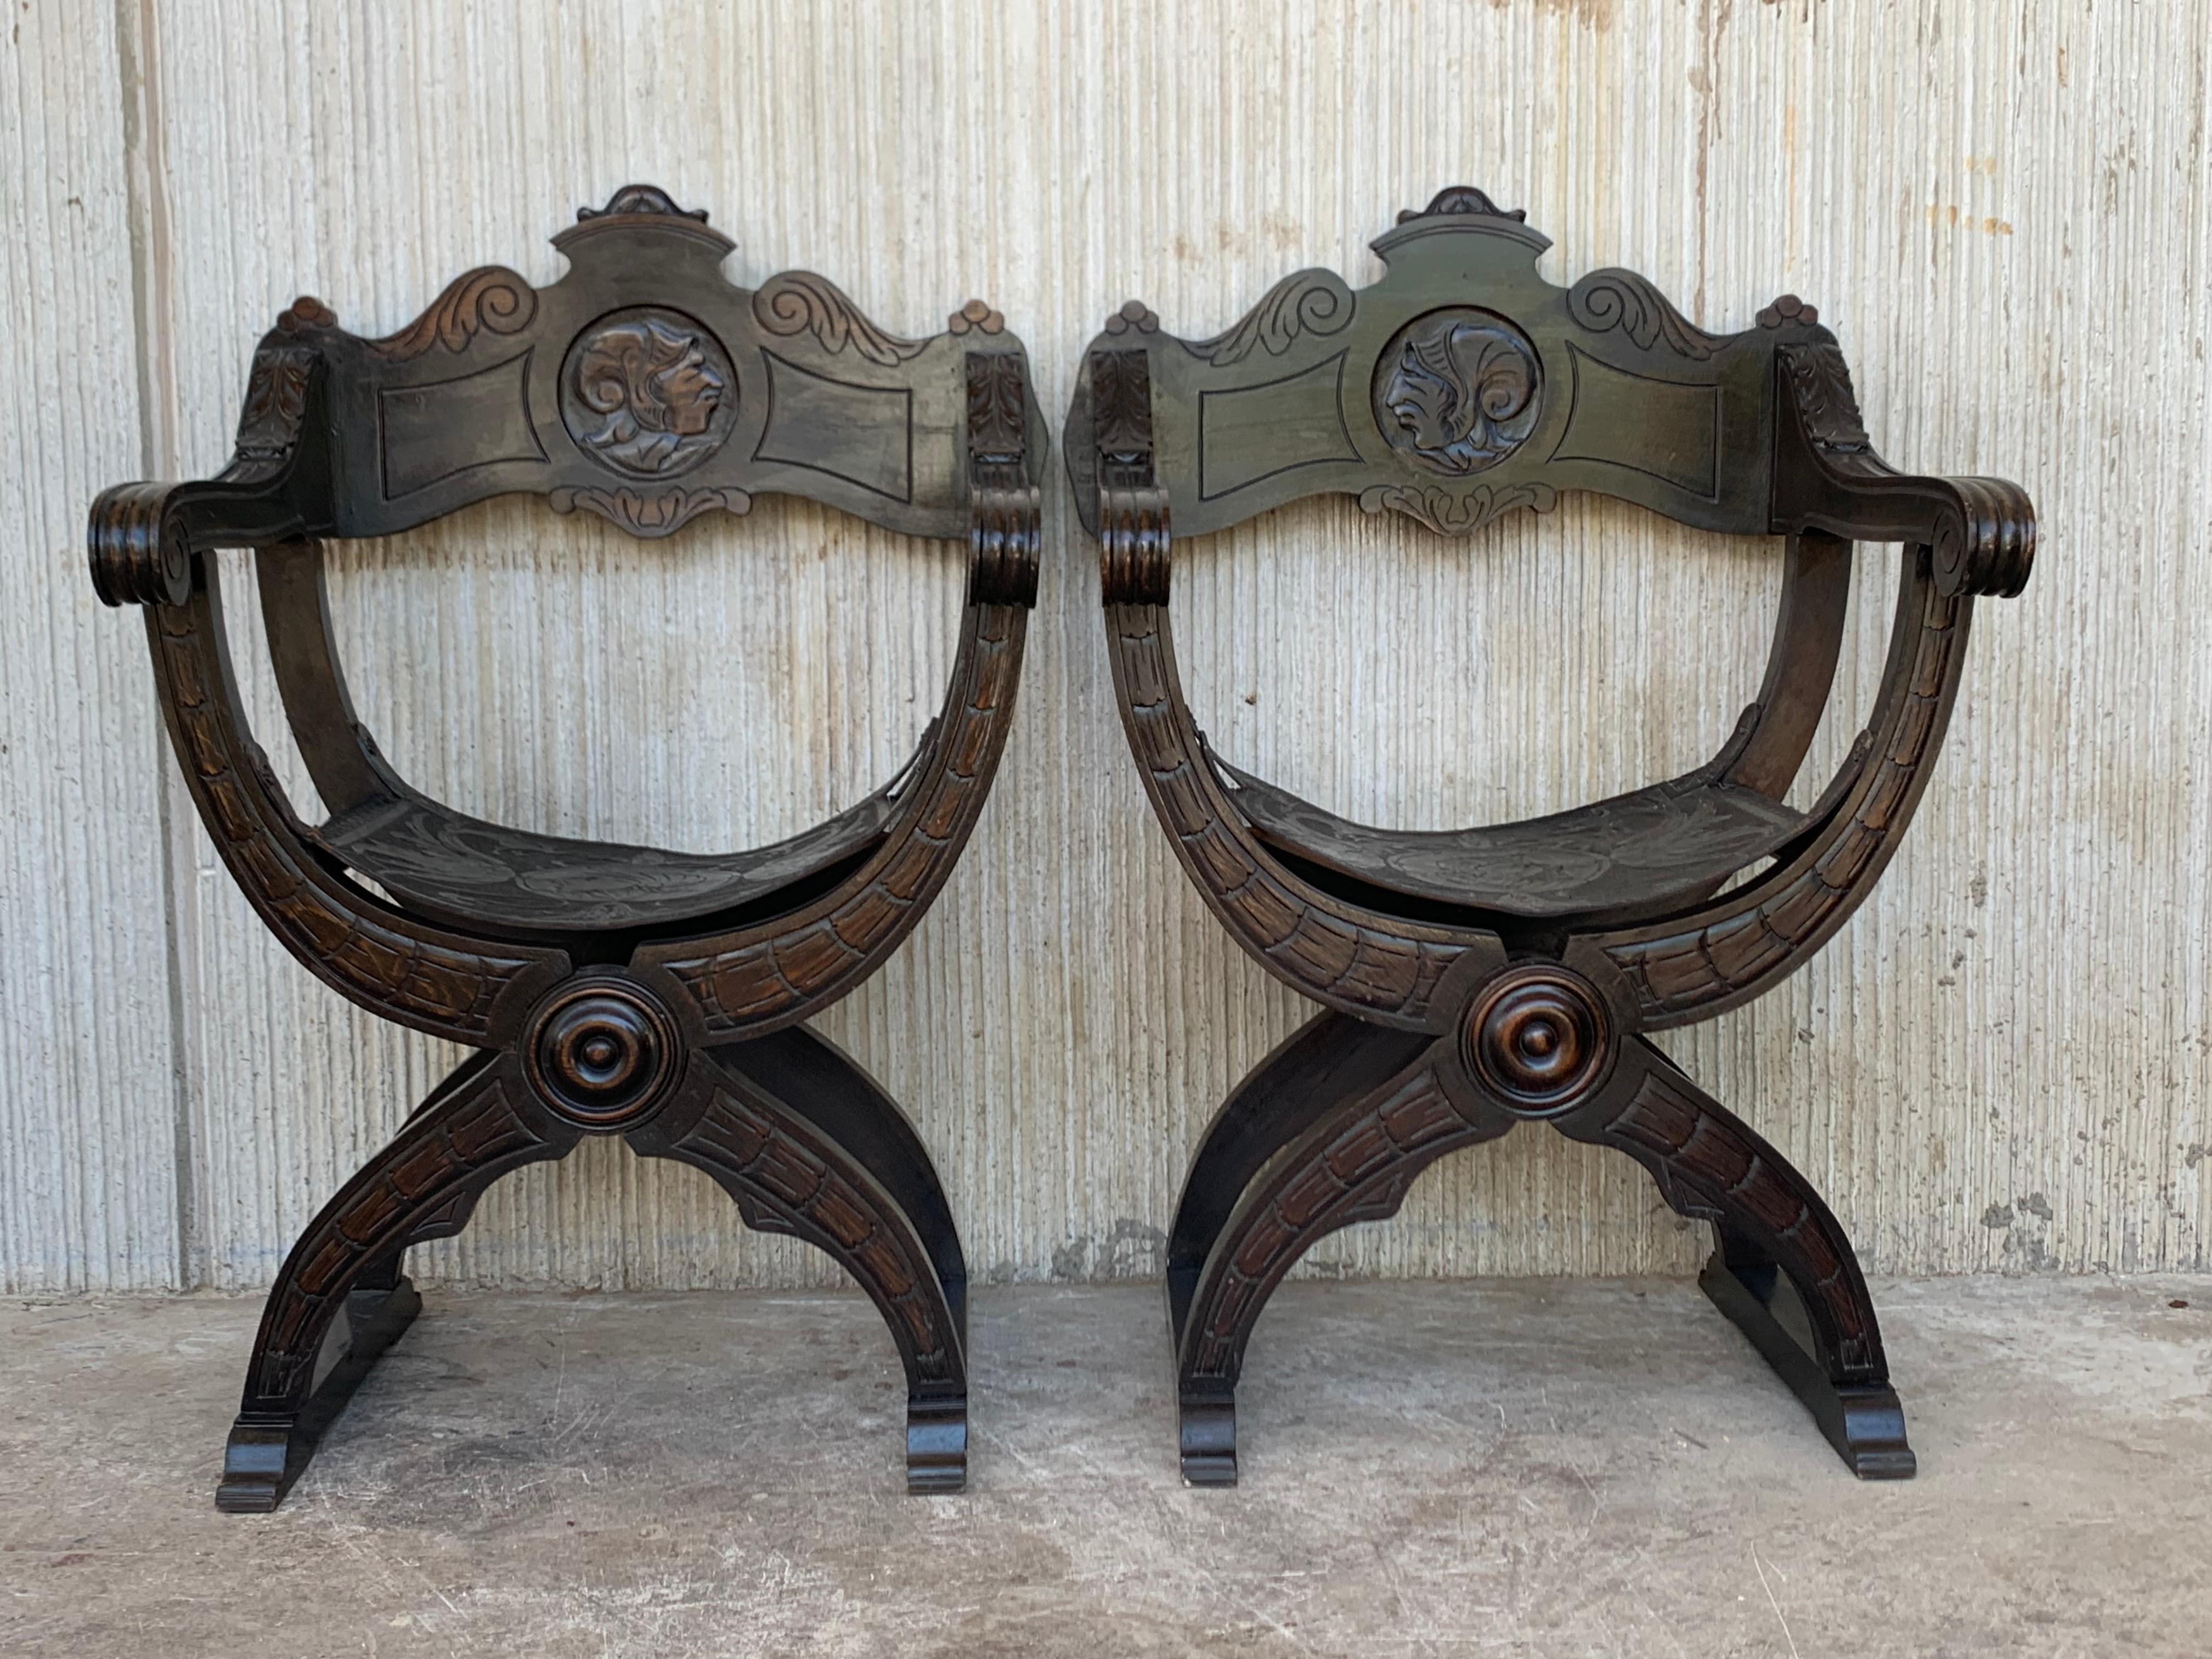 19th century Italian hand carved walnut Savonarolas chairs, circa 1880. Having wonderfully carved frame with scrolling arms, aged black tooled leather seat and back, accented with brass rosettes and exhibiting a lovely patina. In perfect